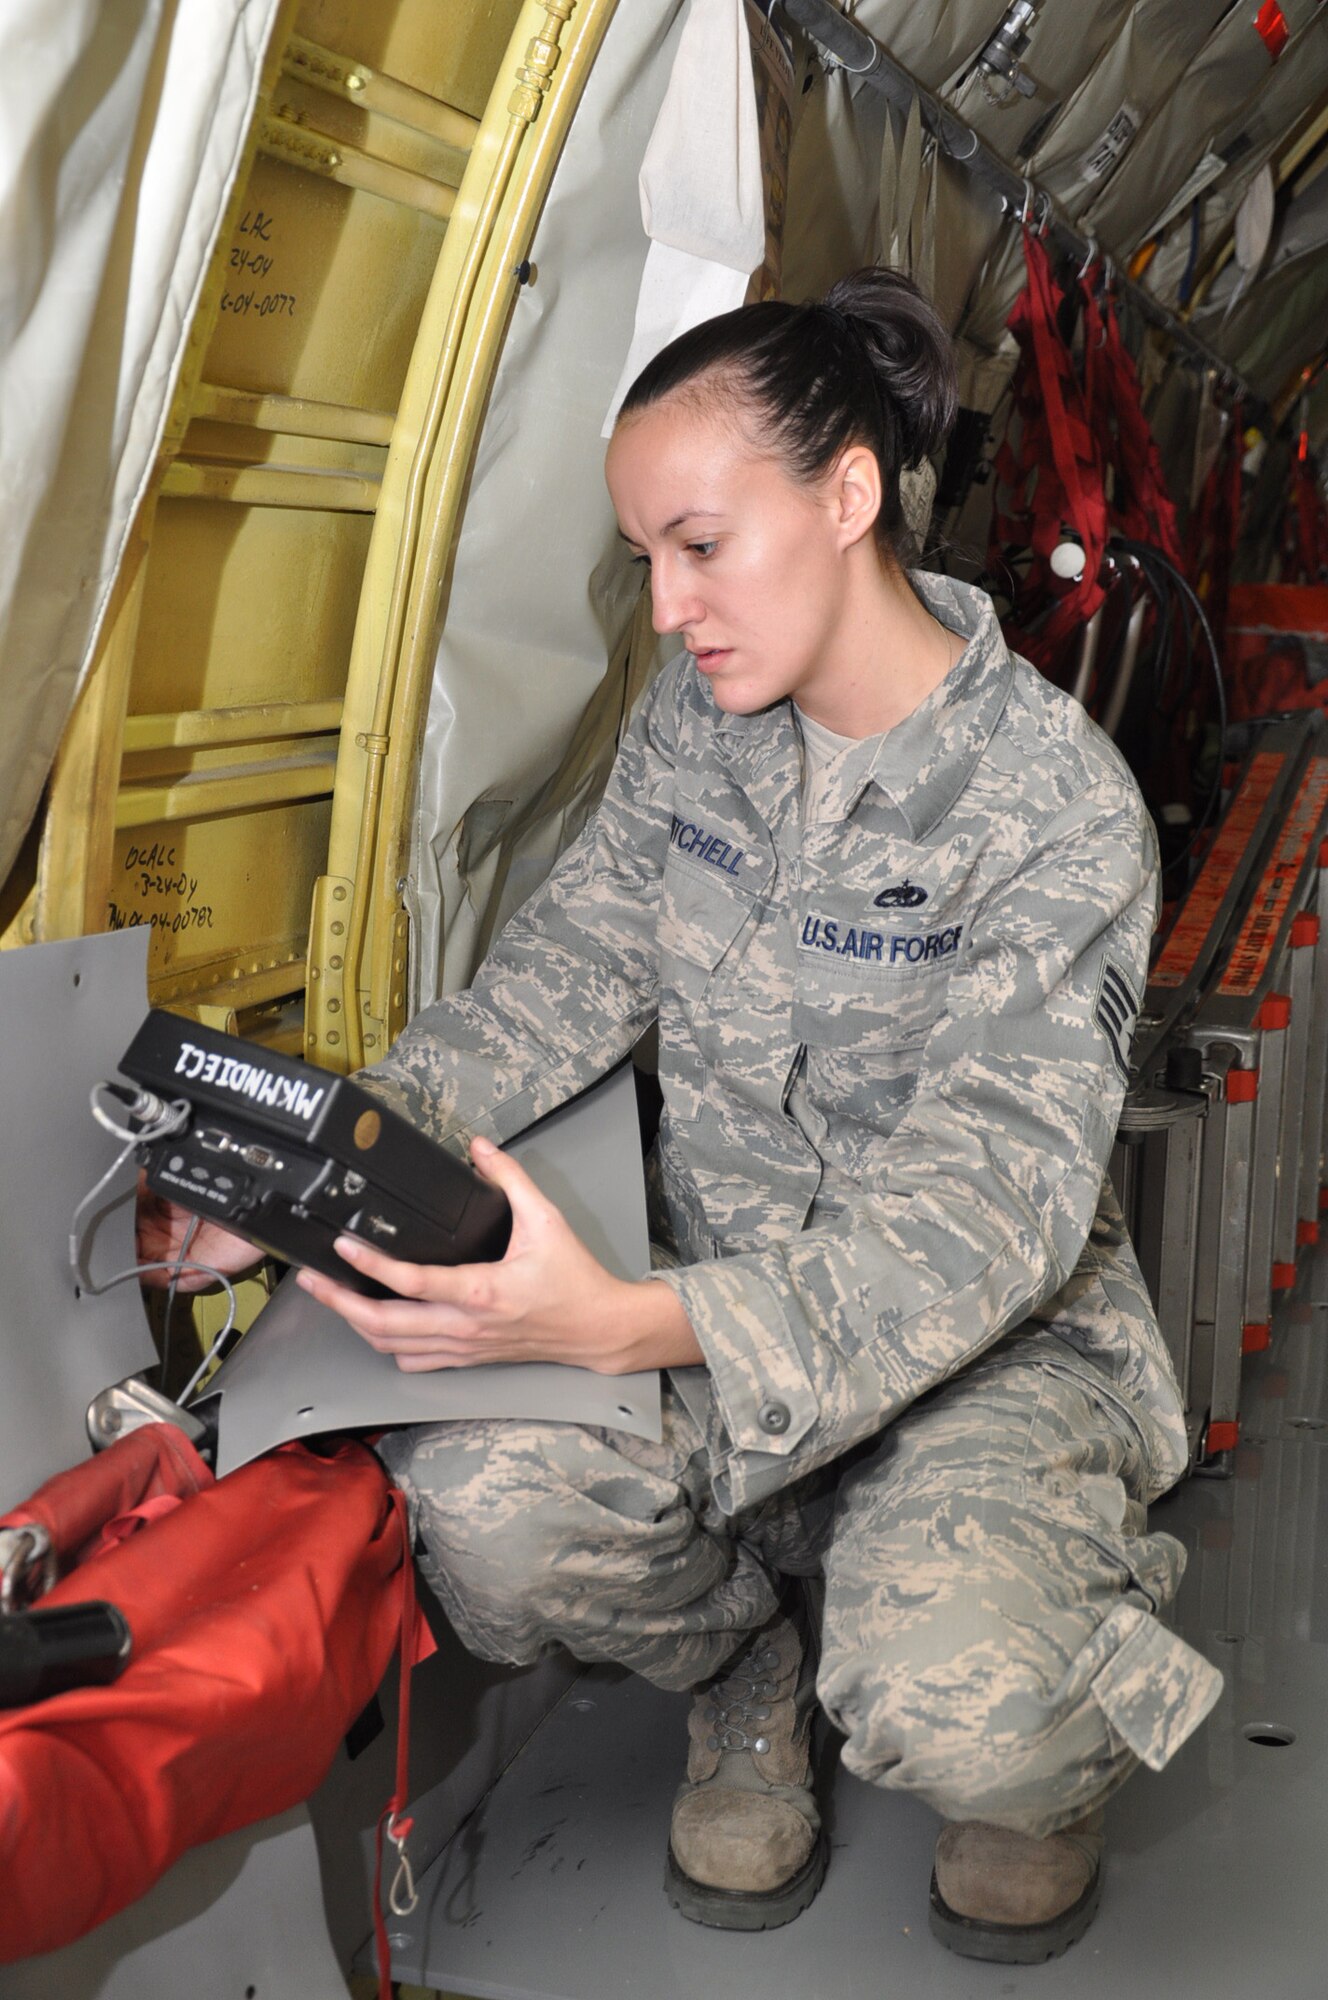 Staff Sgt. Amanda Mitchell, 931st Maintenance Squadron, uses an eddy current probe to search for surface and near-surface cracks on the bulkhead of a KC-135 Stratotanker. (Air Force photo by Tech. Sgt. Brannen Parrish)